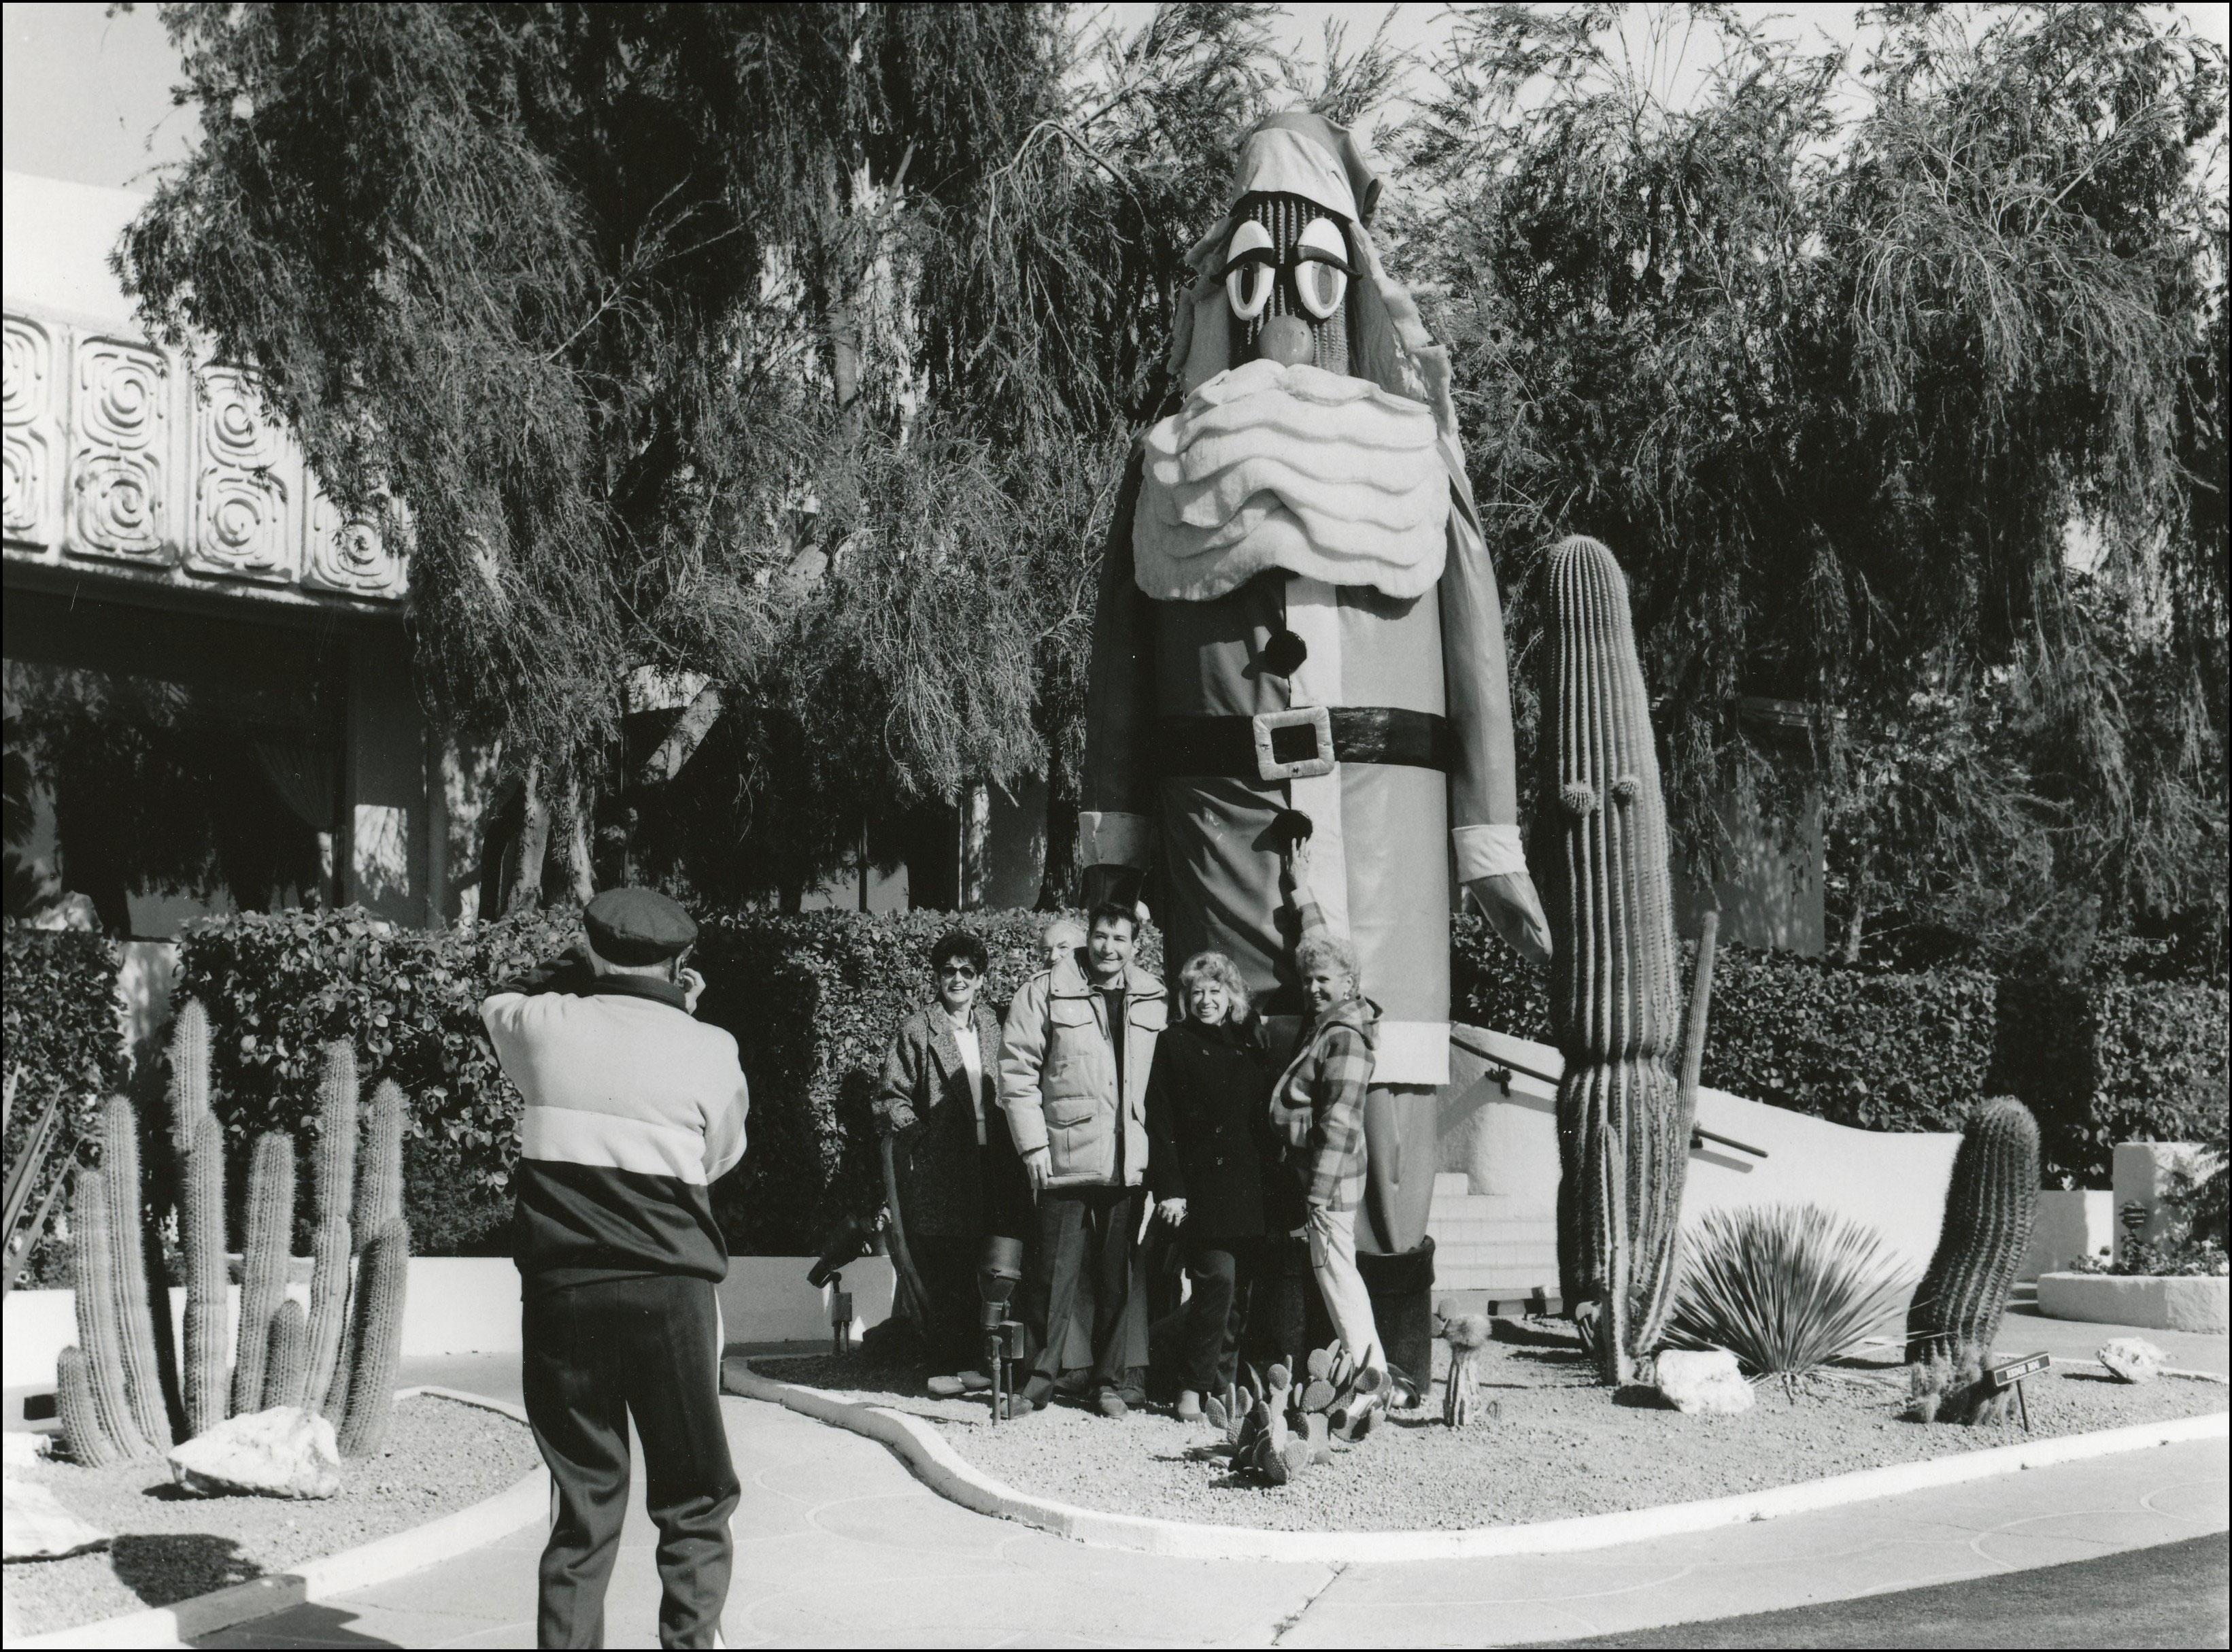 Large saguaro cactus with Santa decoration. Picture of someone taking a photo of four people standing in front of it.